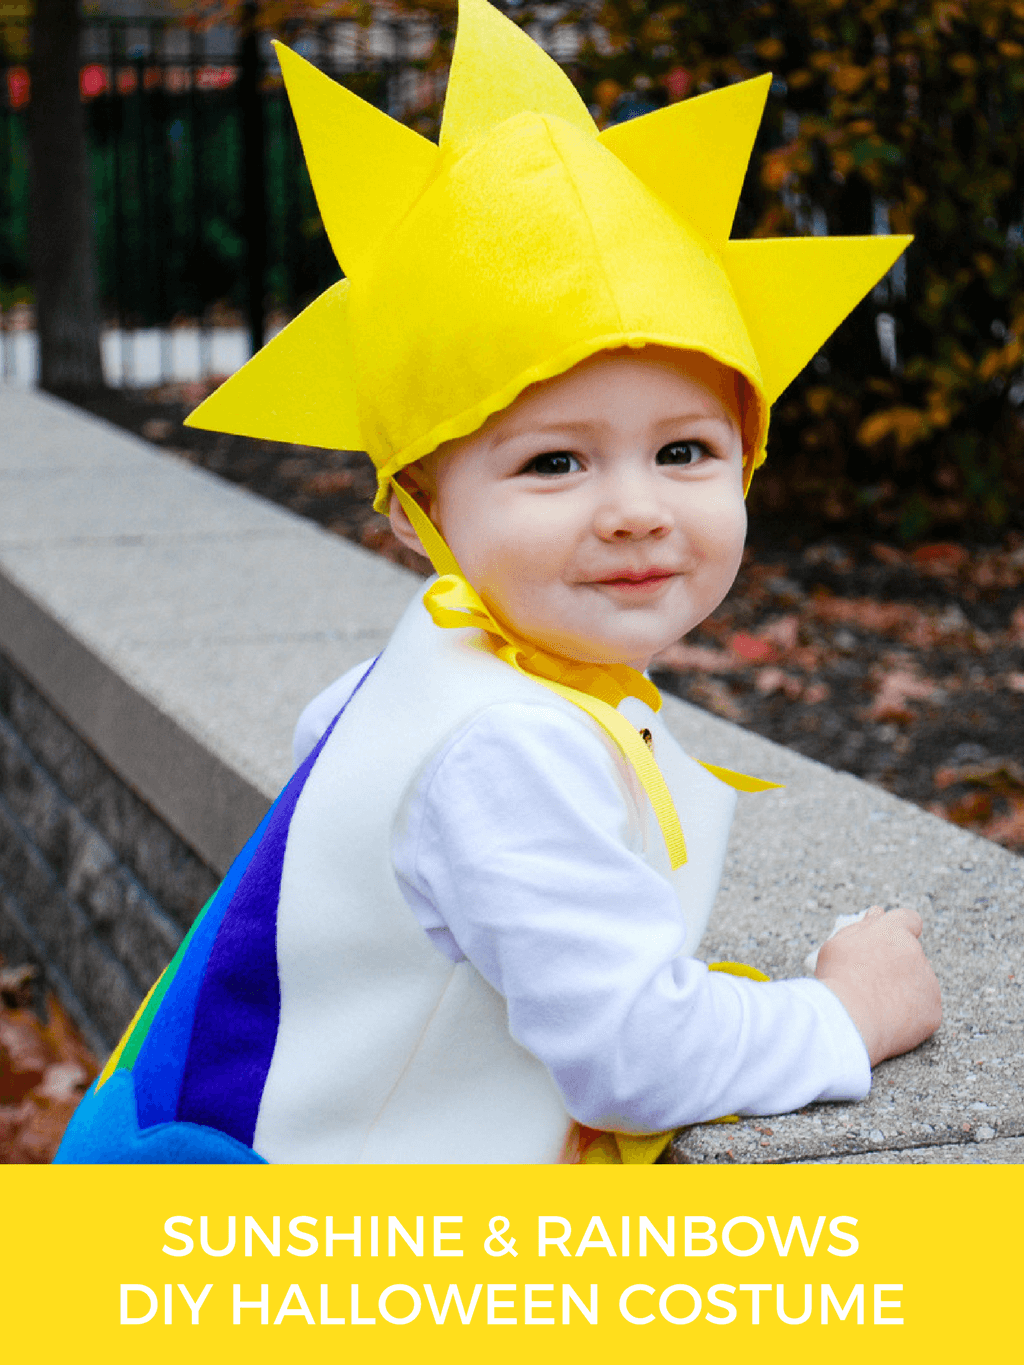 Sunshine and Rainbows DIY Halloween costume - cute DIY Halloween costume idea for toddlers, baby and kids. Follow this free sewing pattern and tutorial to make your own handmade sunshine and rainbows costume!